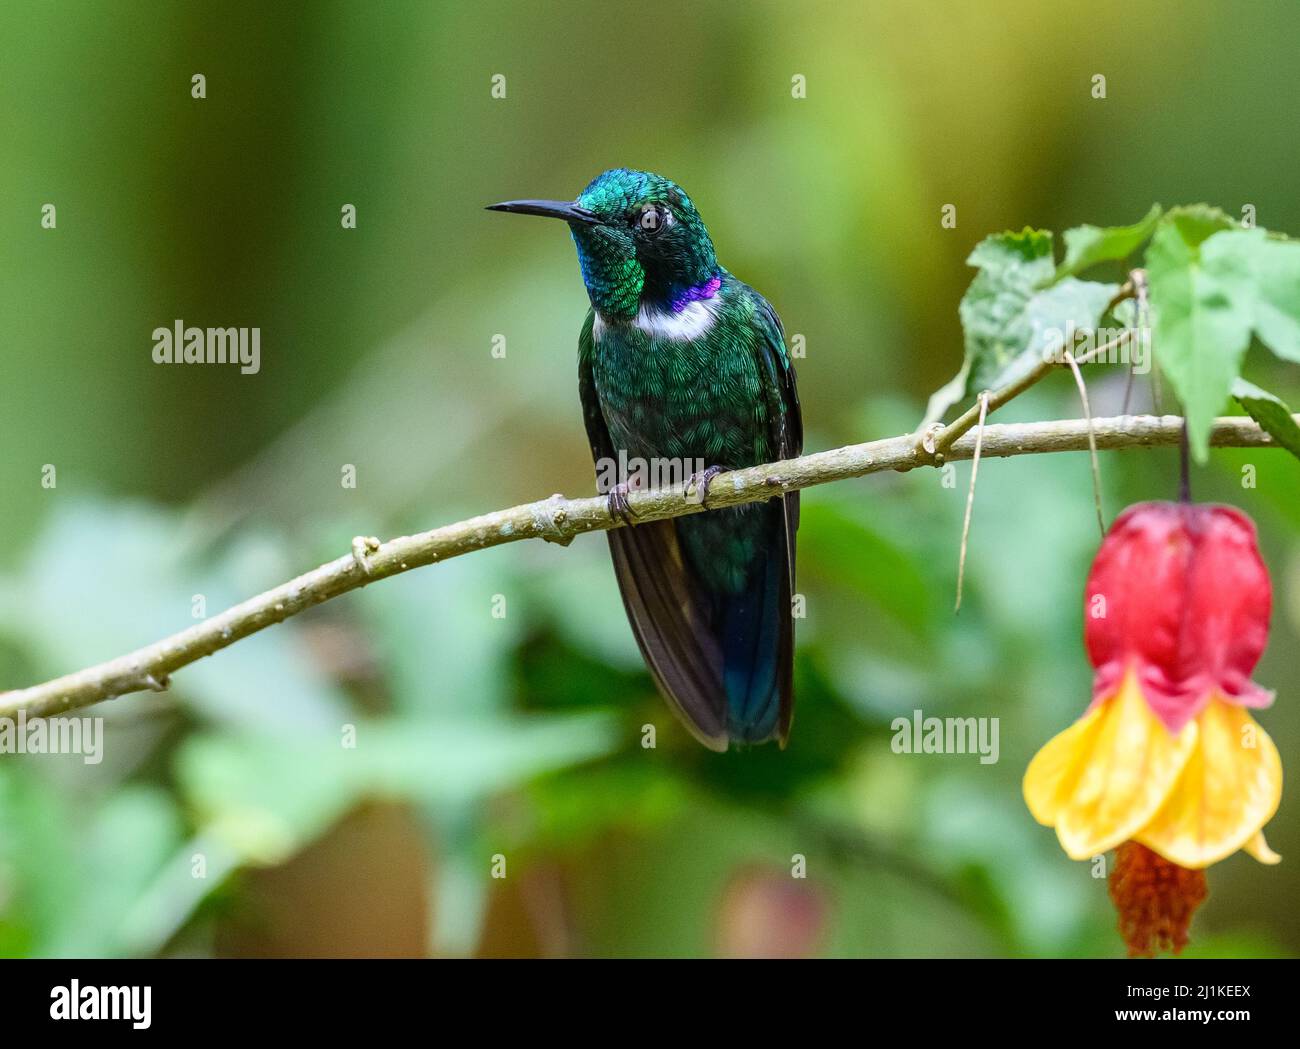 A male White-throated Daggerbill hummingbird (Schistes albogularis) perched on a branch. Colombia, South America. Stock Photo